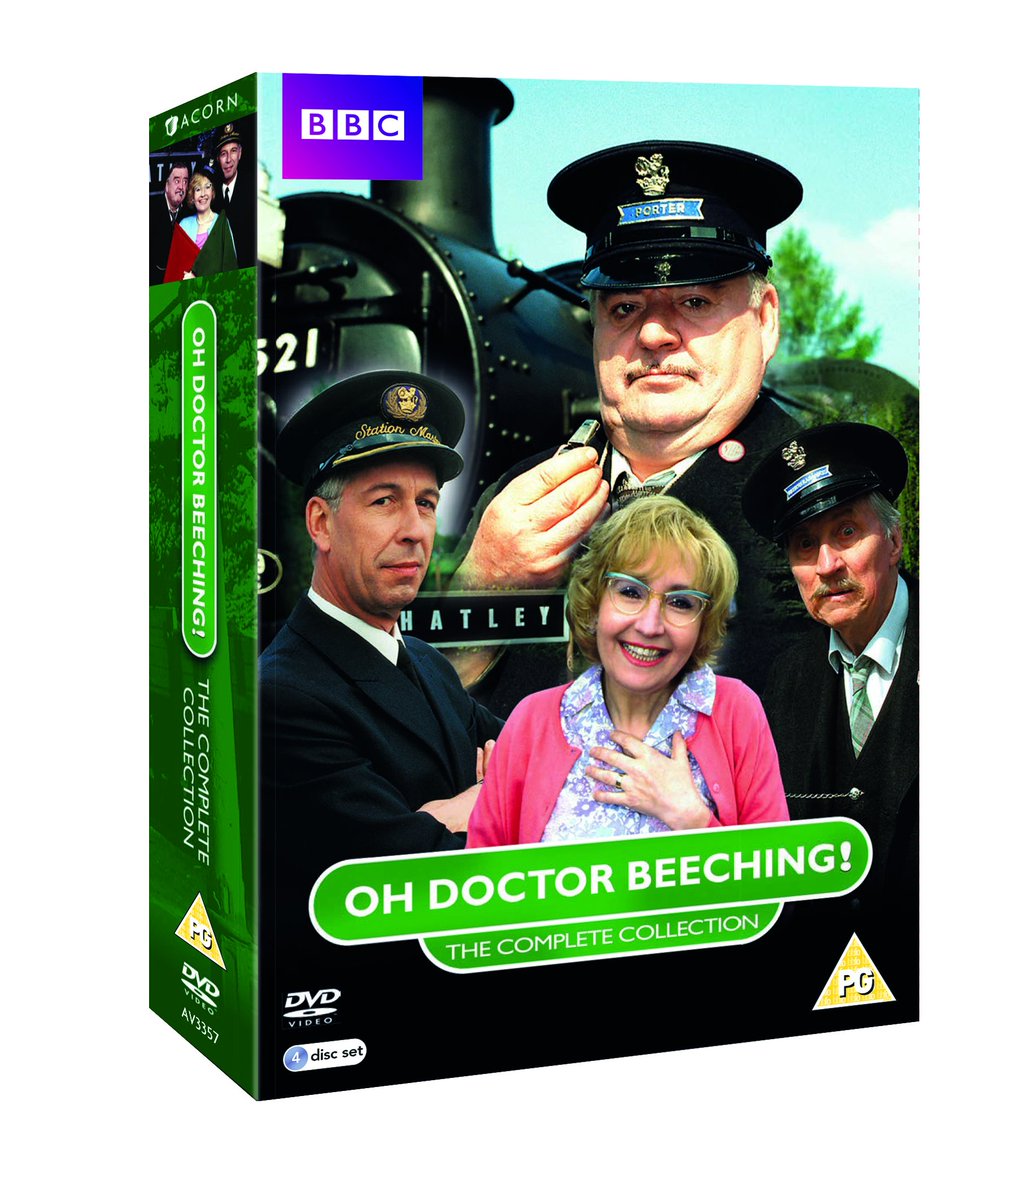 All board! Classic BBC comedy #OhDoctorBeeching is out today!  (amzn.to/2jOxGnA)